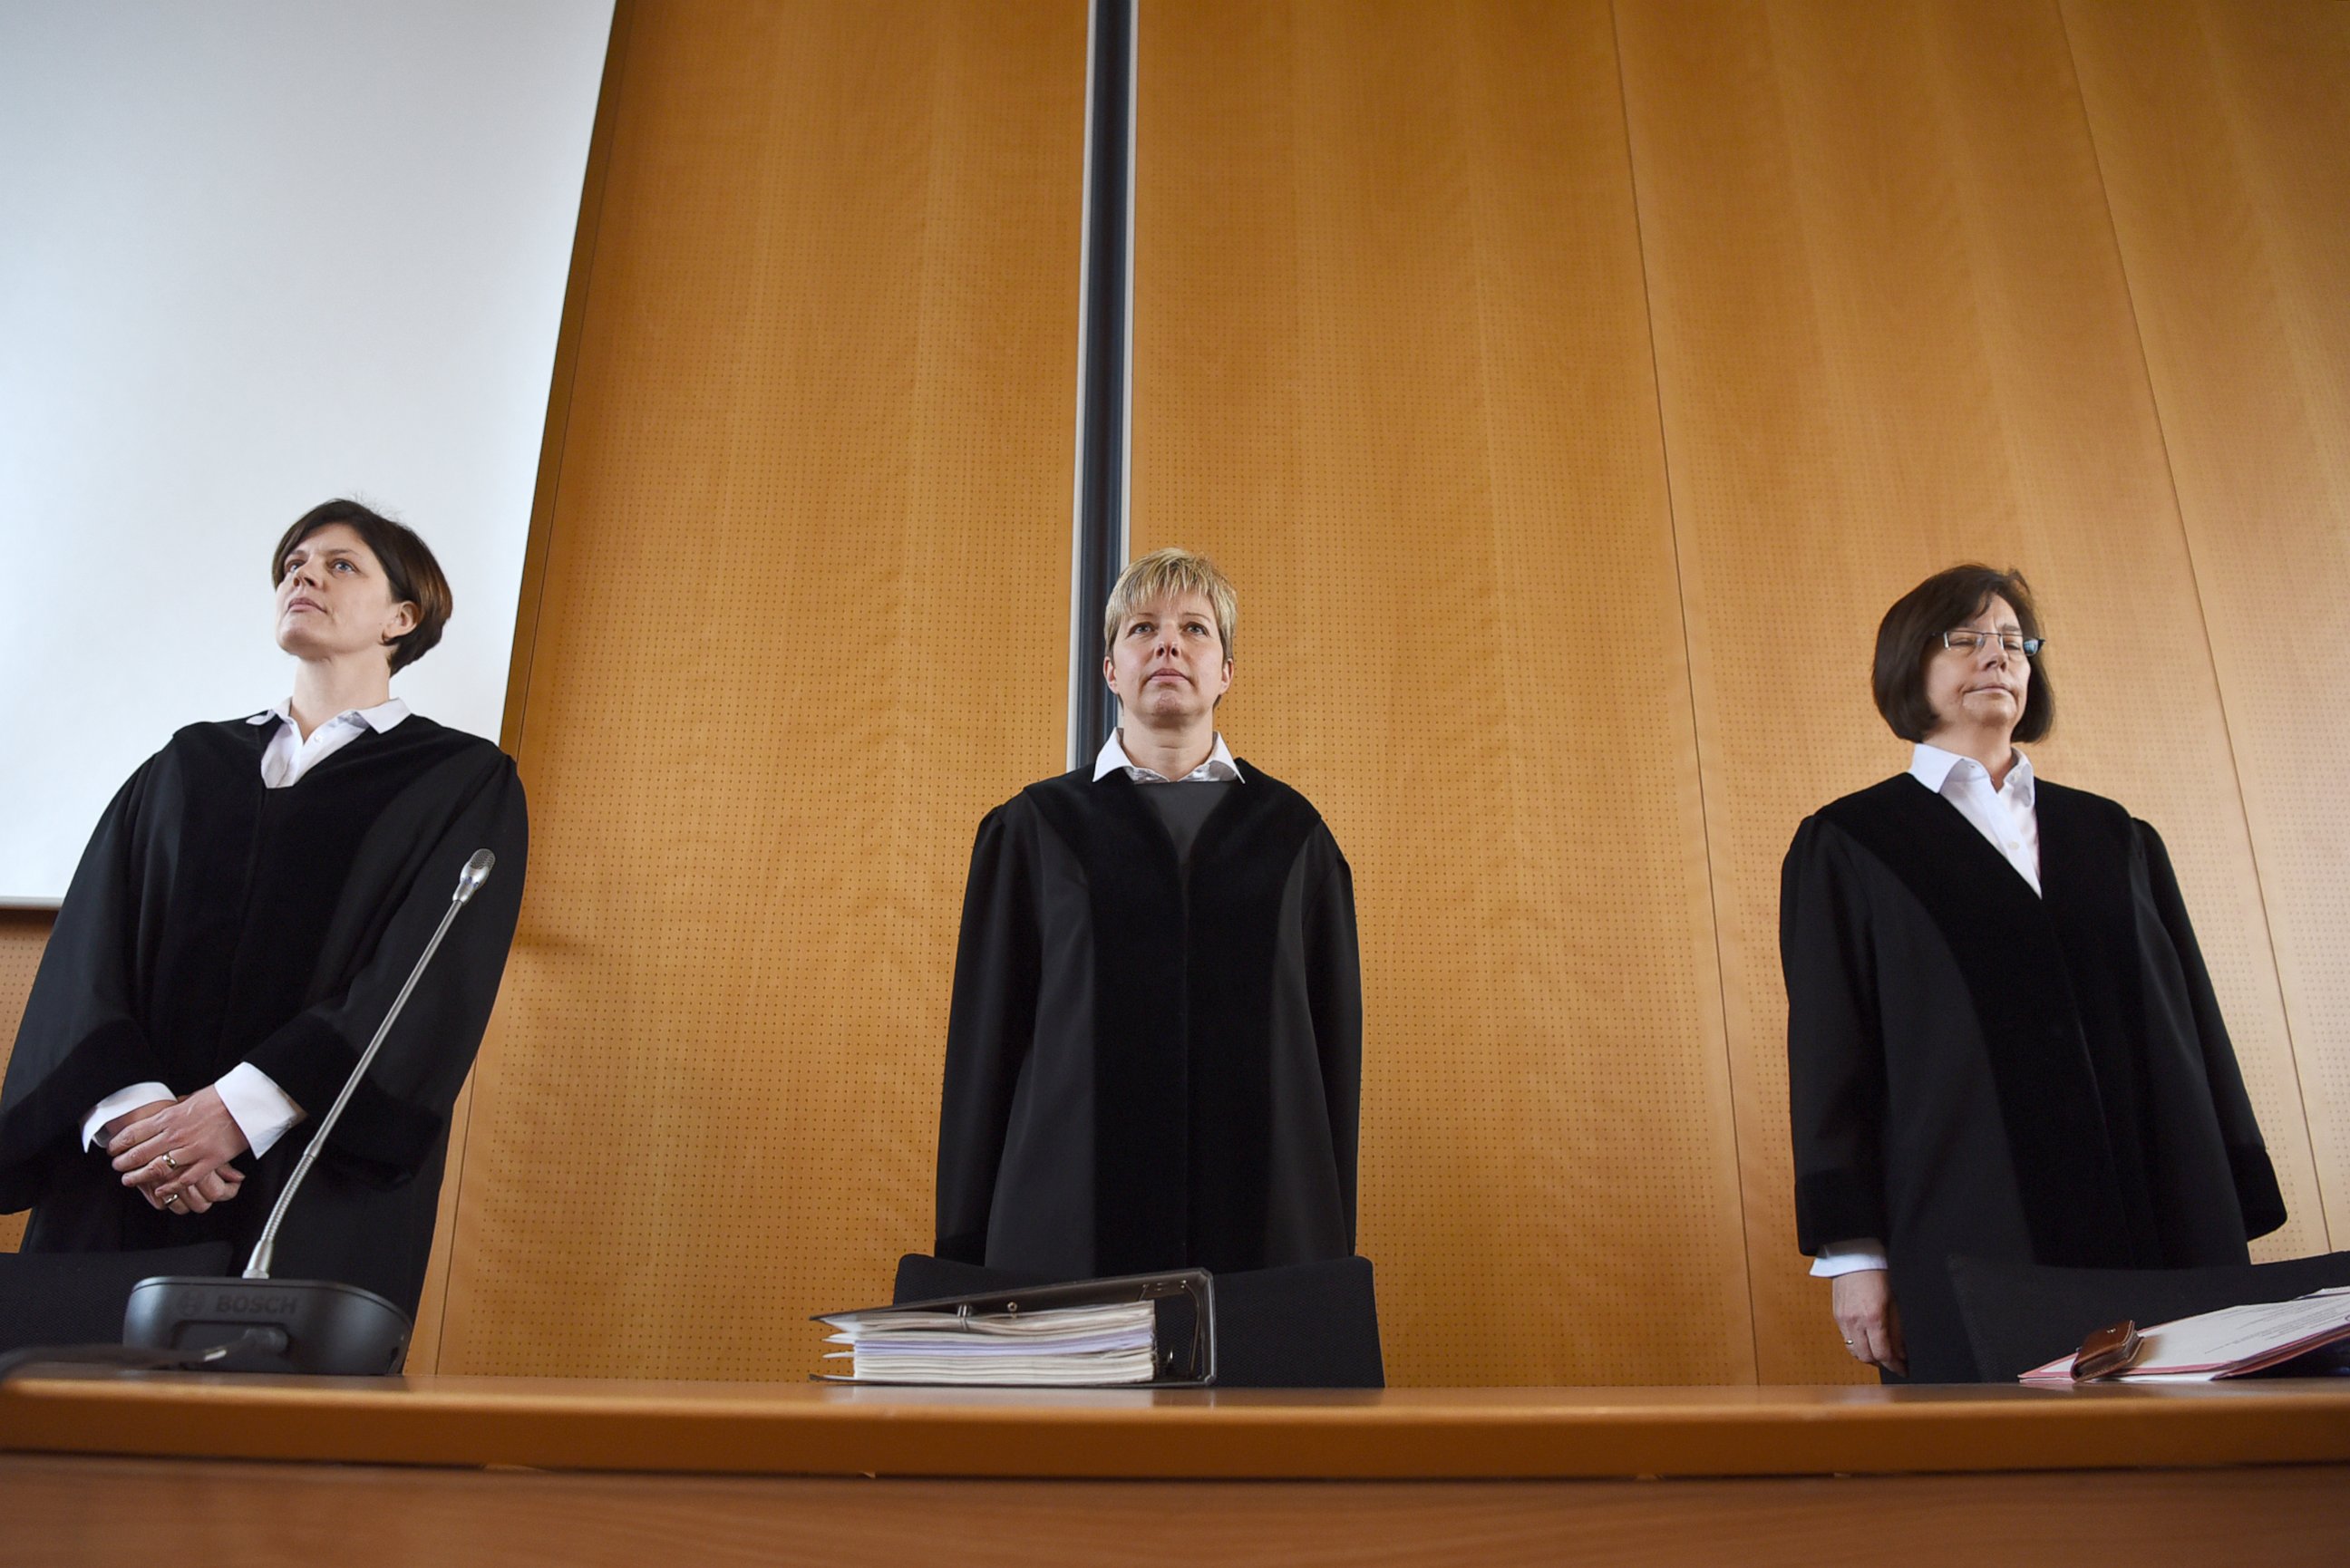 PHOTO: Preseding judge Anke Grudda, center, and judges Sabine Tegethoff-Drabe, left, and Sylvia Suermann, right, are pictured prior to the opening of the trial against a former Auschwitz guard at court in Detmold, Germany, Feb. 11, 2016. 